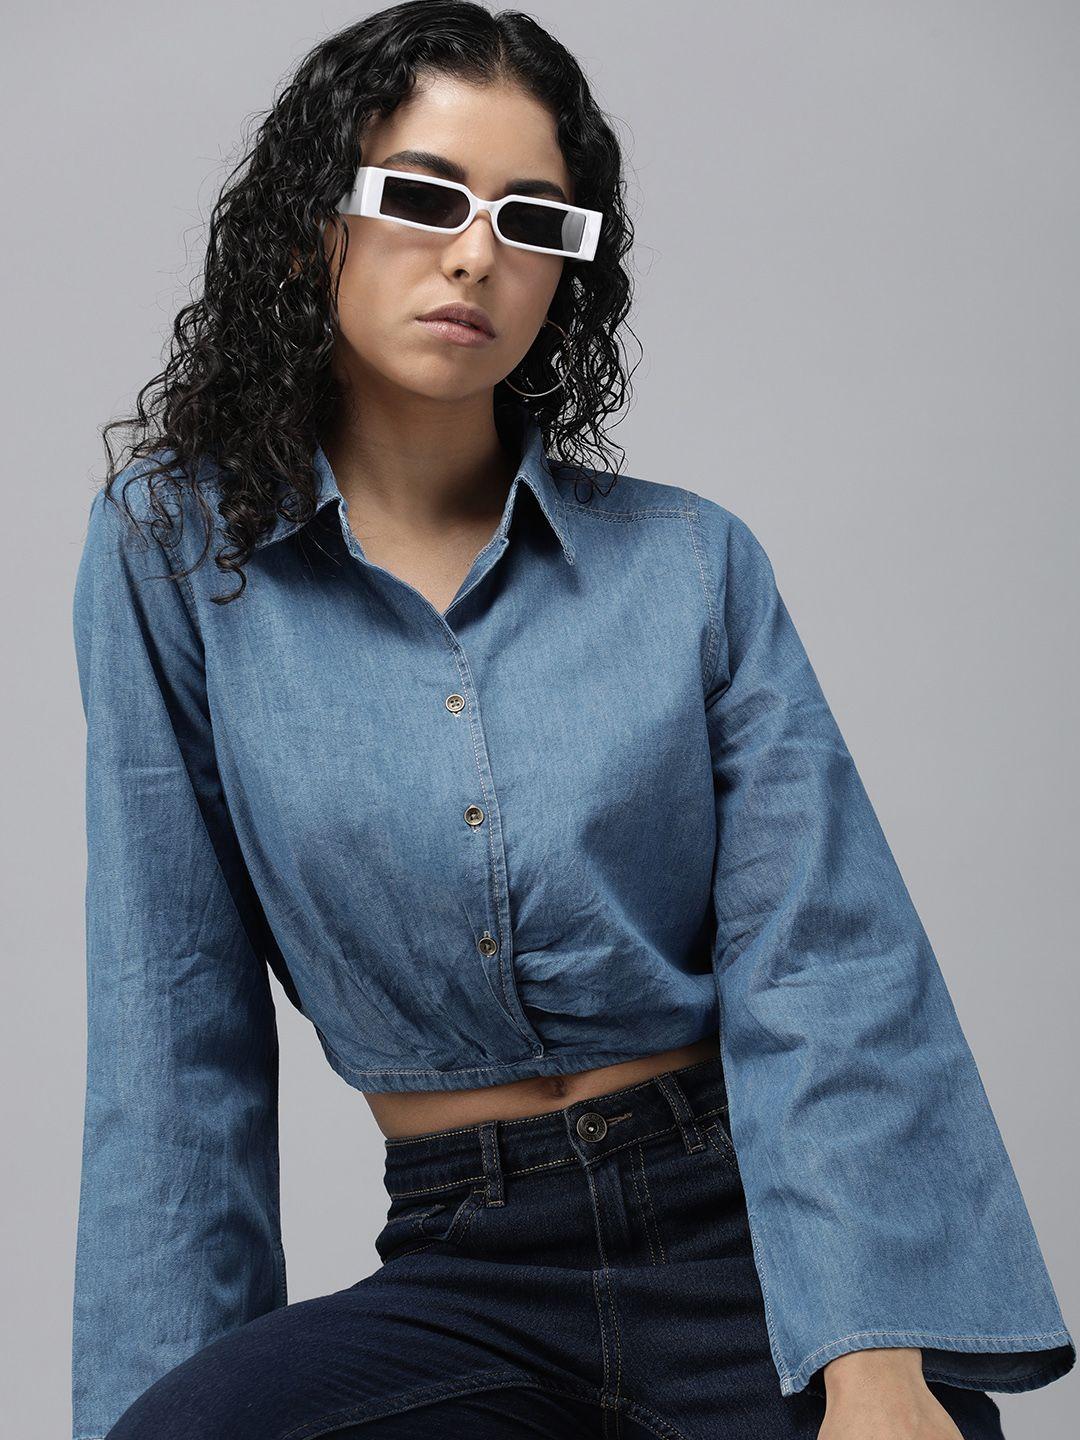 the roadster lifestyle co. pure cotton flared sleeves chambray shirt style crop top